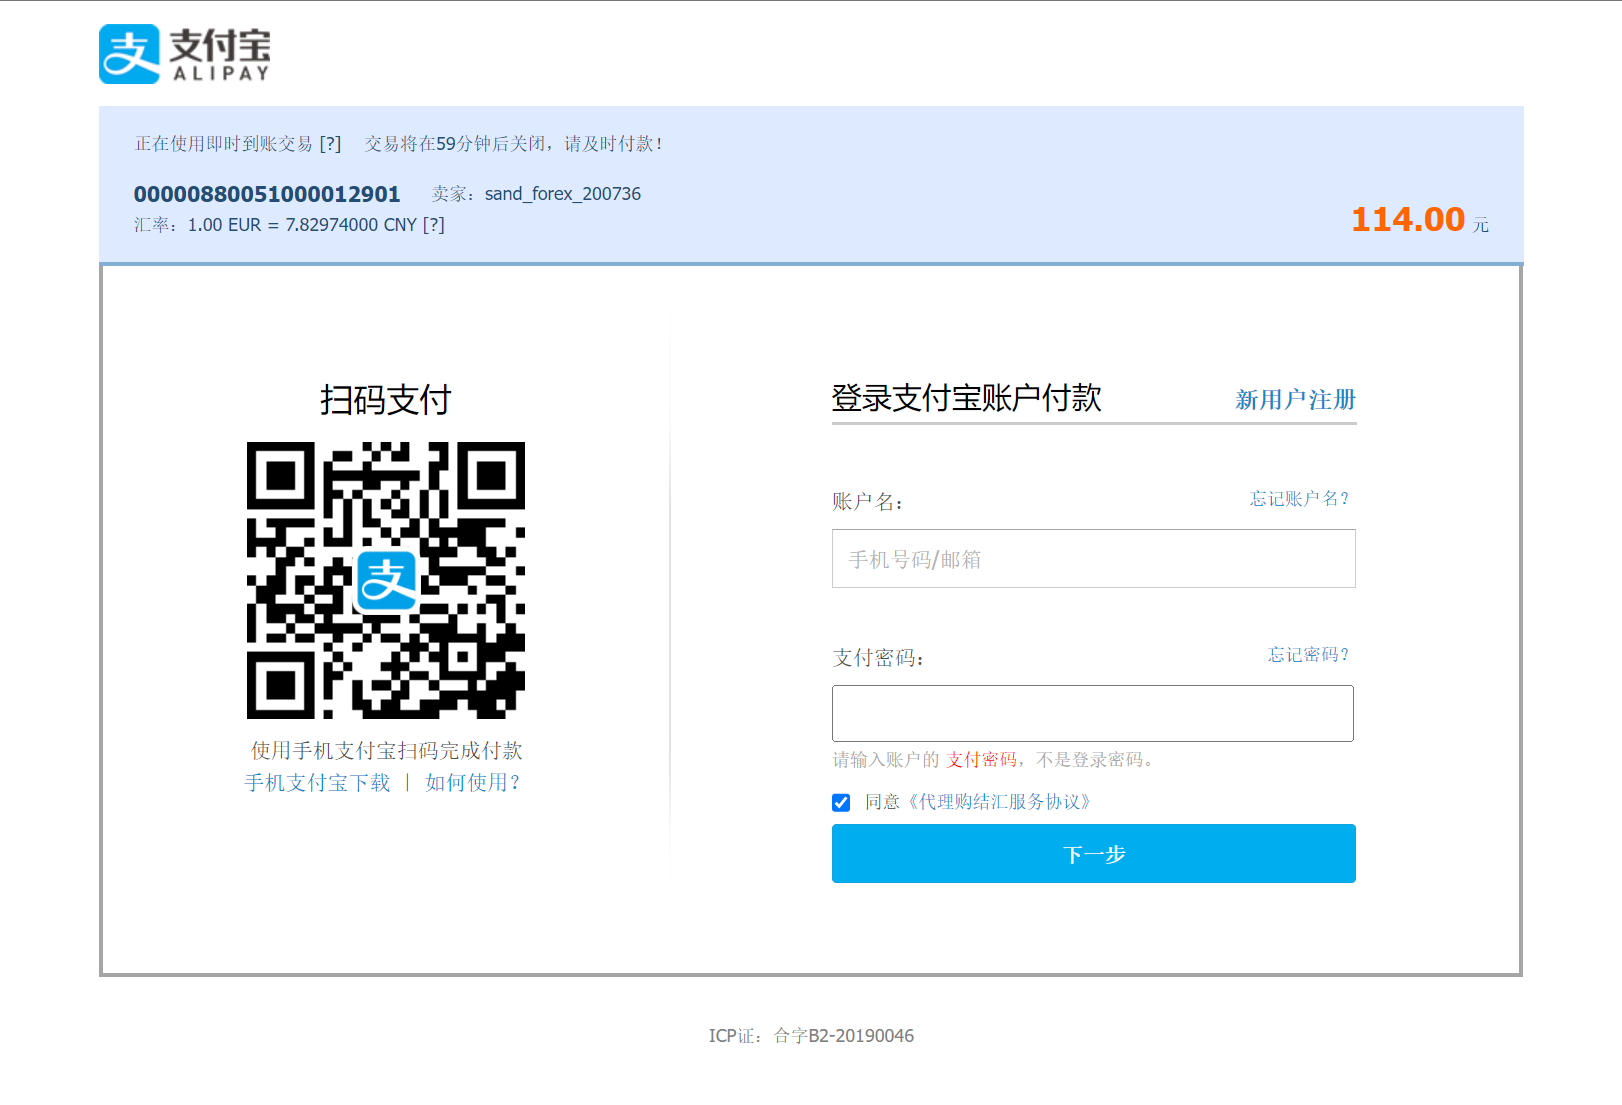 Alipay-consumer-experience-desktop-flow-in-chinese-login-page